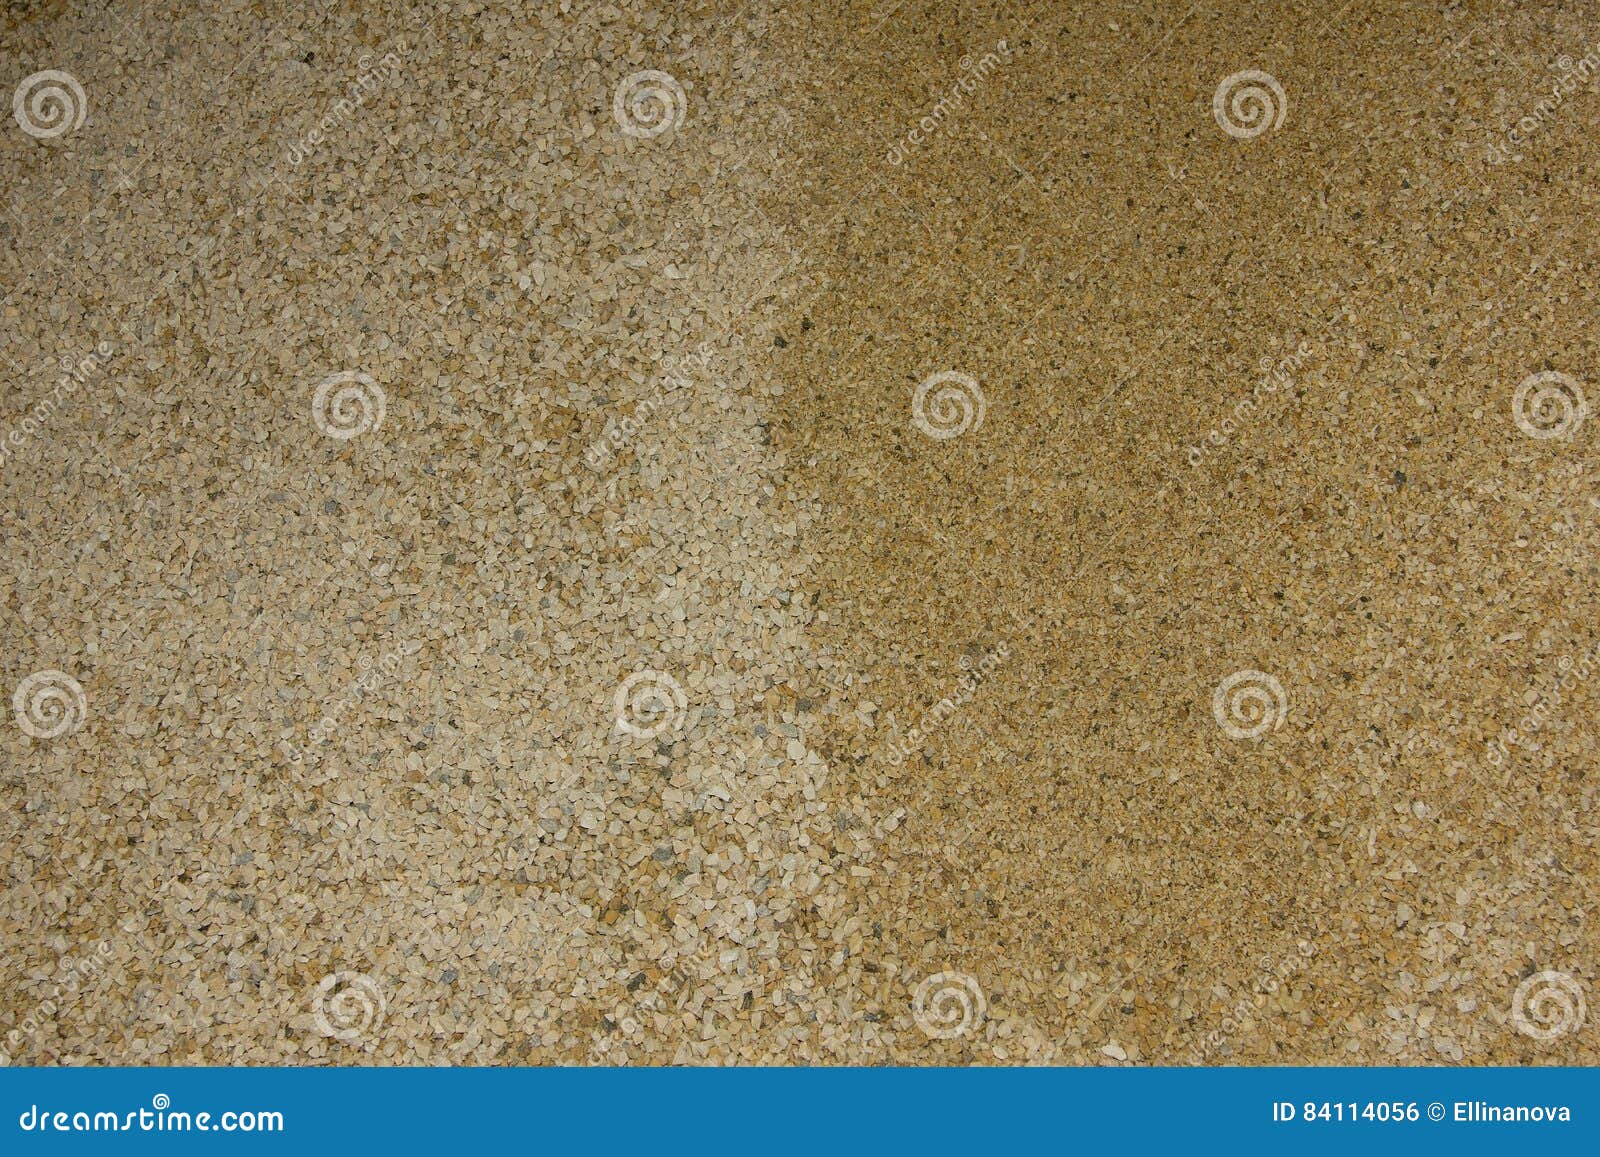 Marble Yellow and Beige Crumb Mineral Grit Texture Stock Photo - Image ...